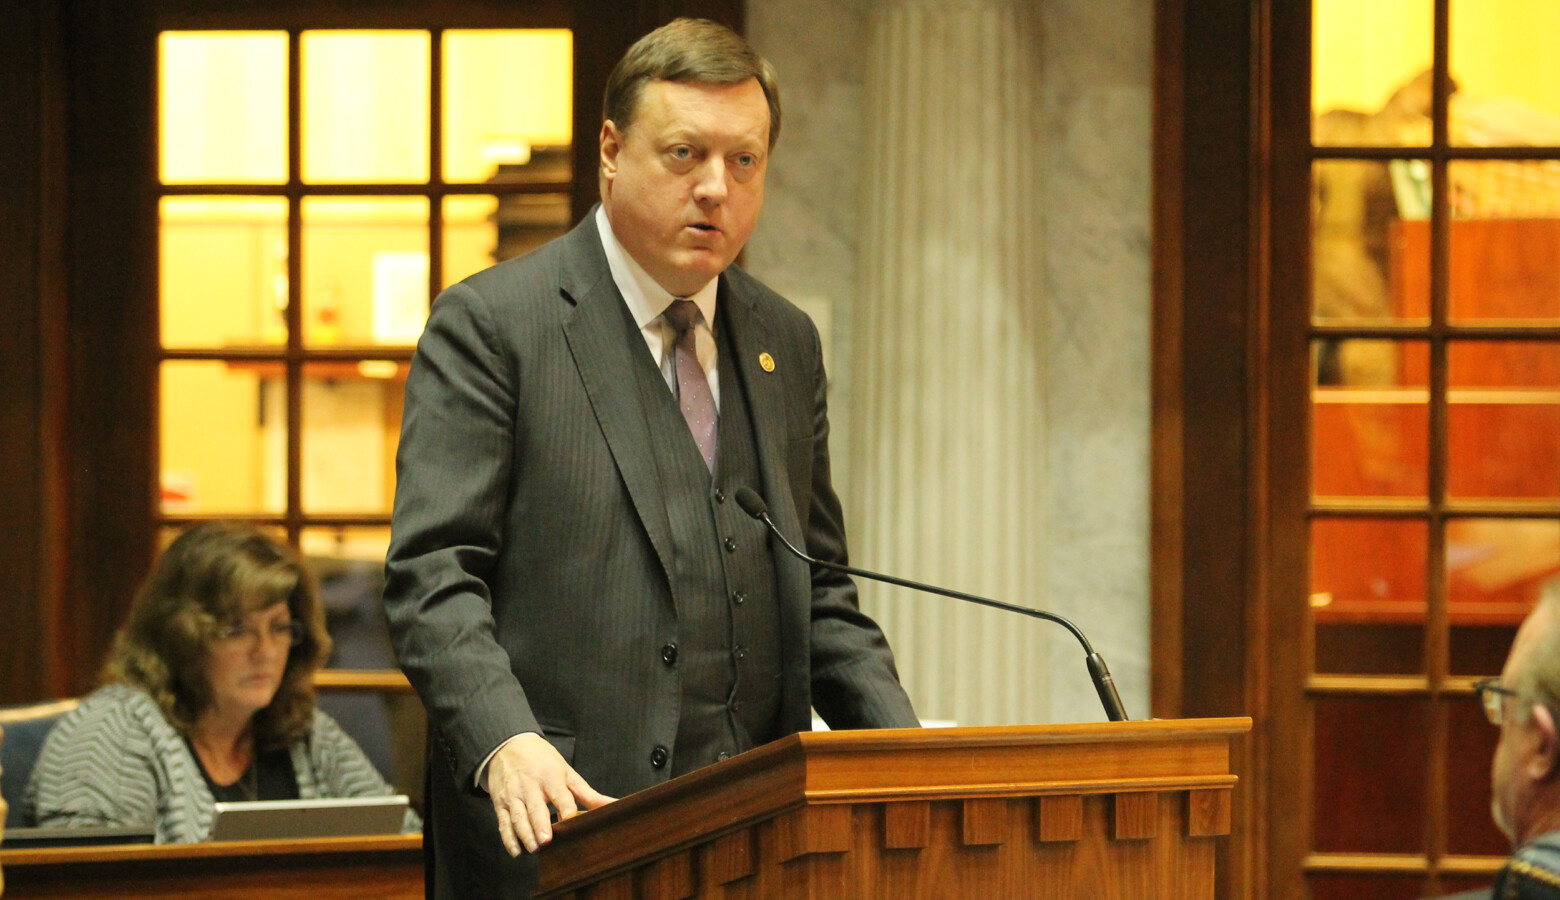 Sen. Eric Koch (R-Bedford) says the bill should be a win-win for the parties involved, but some lawmakers aren't sure ratepayers will benefit. (Lauren Chapman/IPB News)